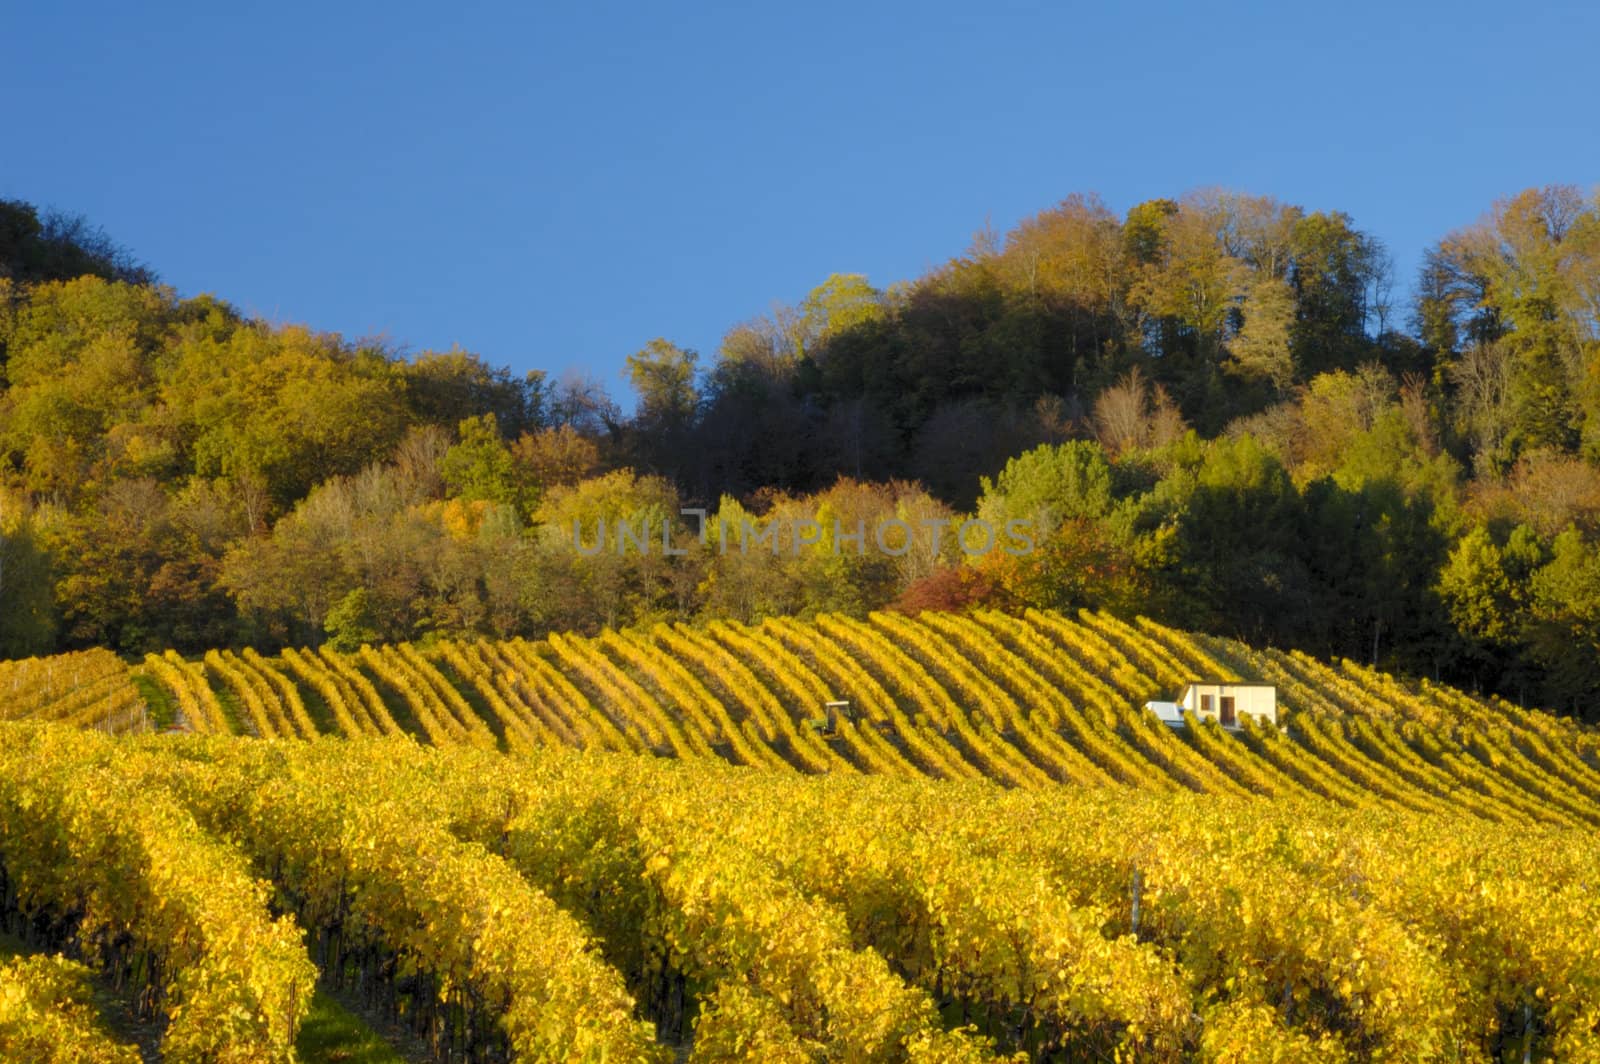 Swiss vineyards of La Cote, after the harvest, under a clear blue sky. A tiny vineyard worker can be seen to the right of the building, with his tractor centre left of the picture. Space for text in the sky.